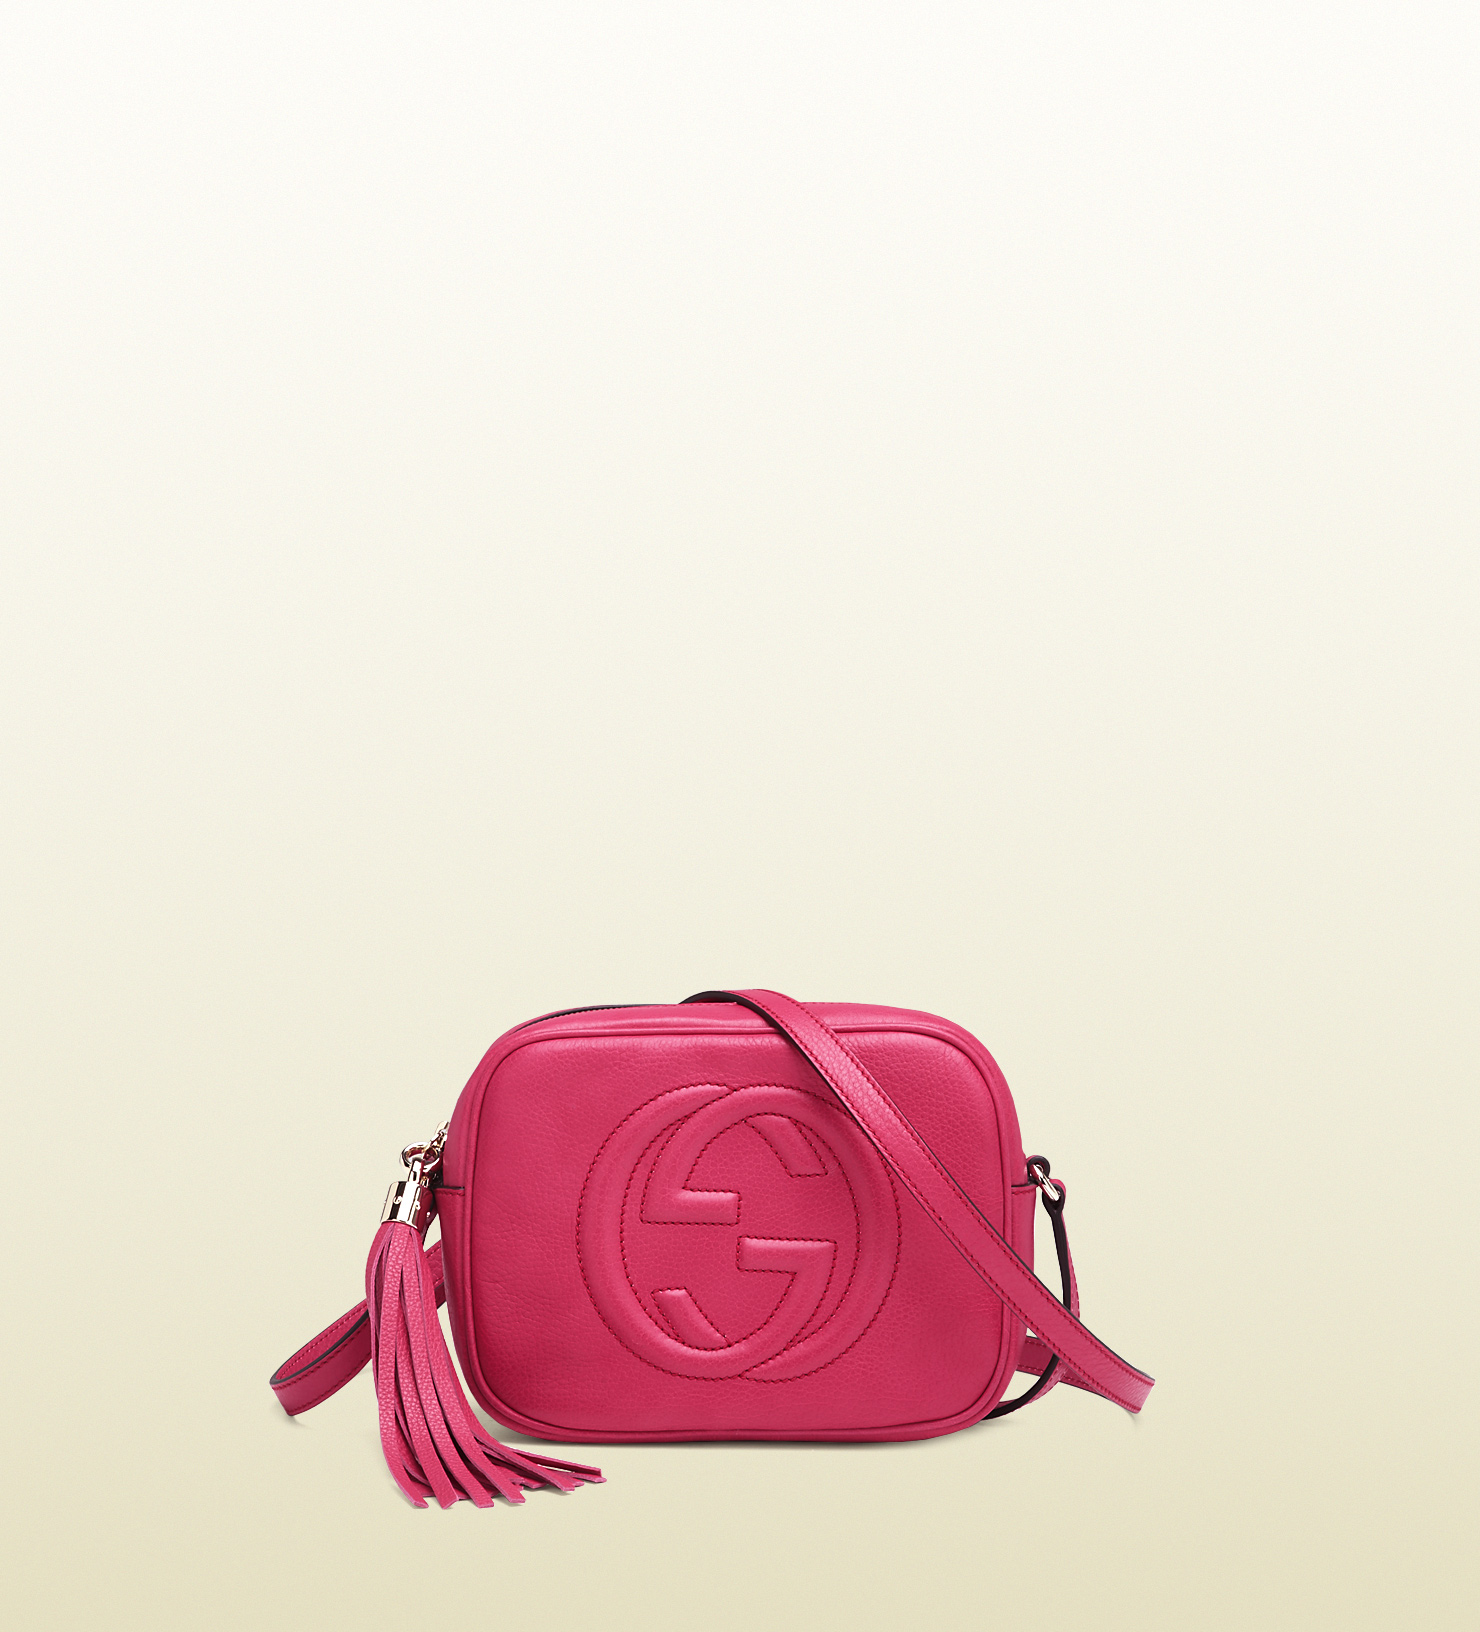 Lyst - Gucci Soho Shocking Pink Leather Disco Bag in Pink